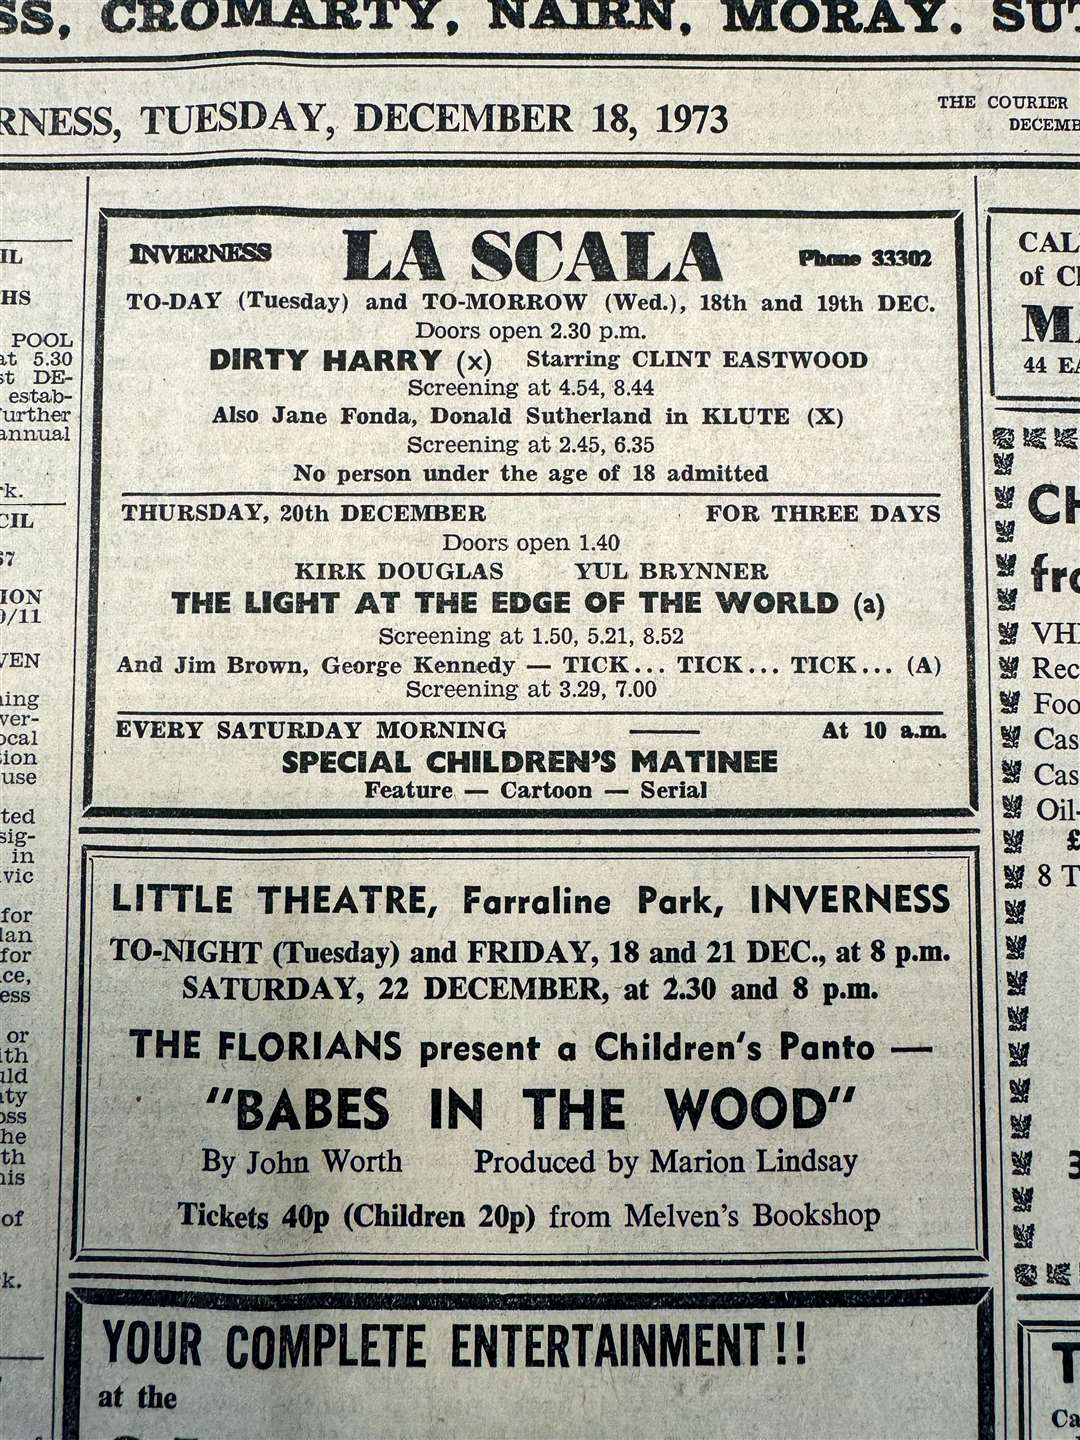 The film offerings at La Scala included Dirty Harry starring Clint Eastwood.